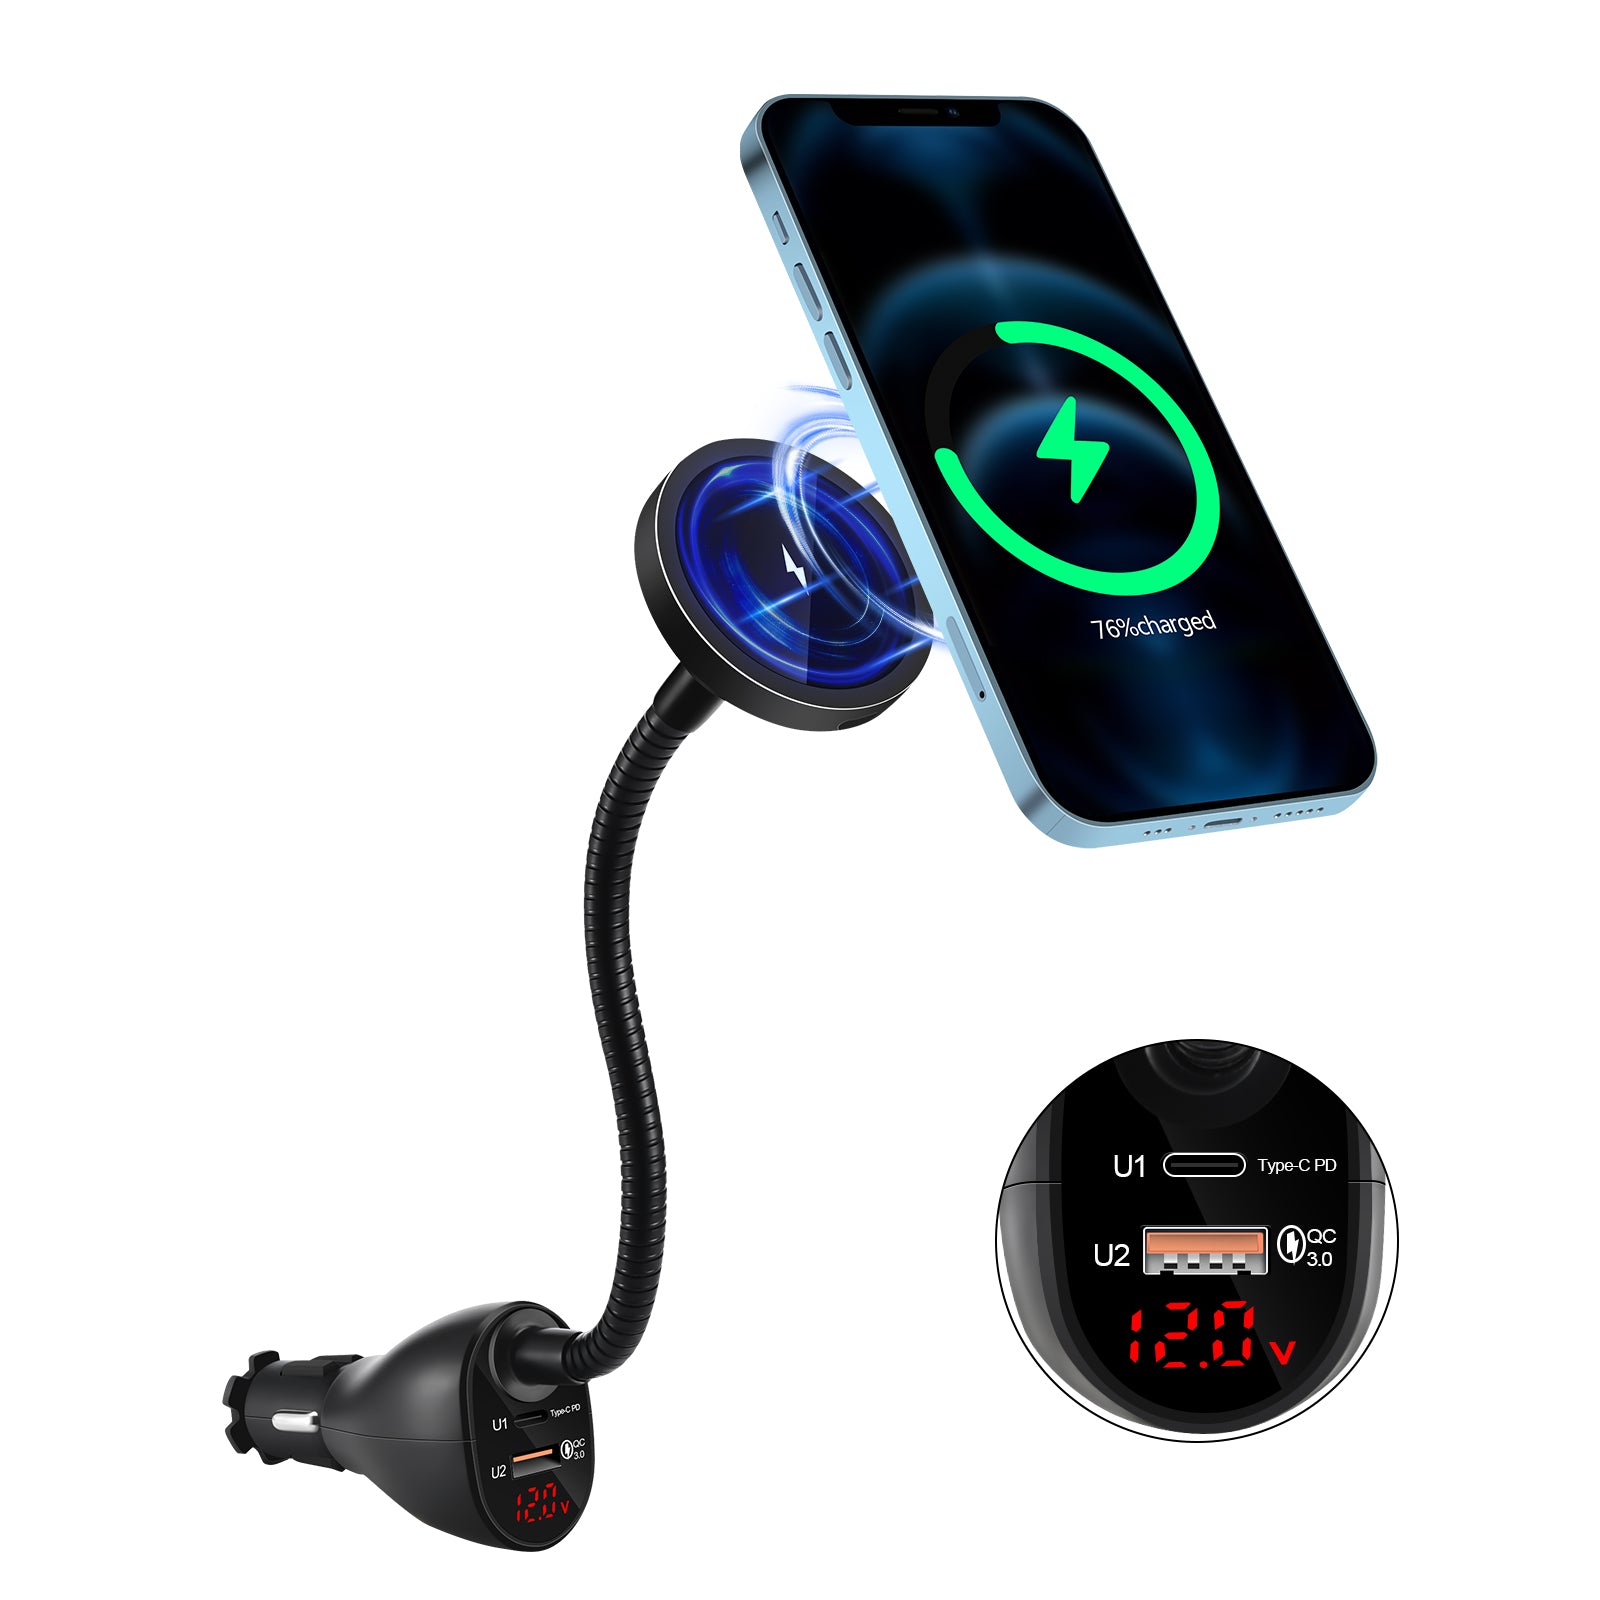 Magnetic Wireless Car Charger For Iphone 12/12 Pro/12 Mini/12 Pro